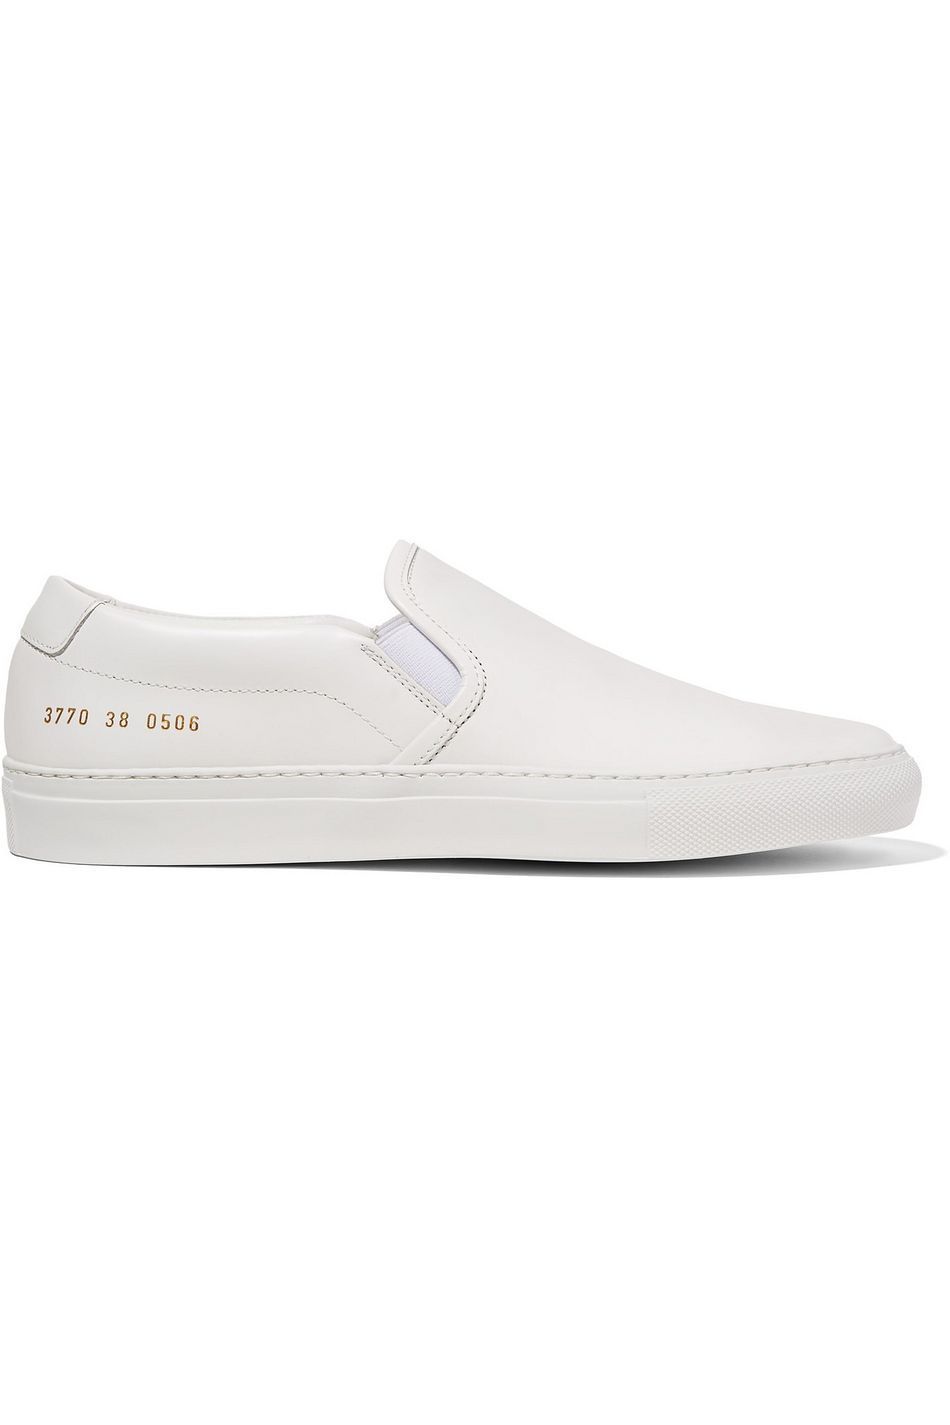 white leather slip on shoes